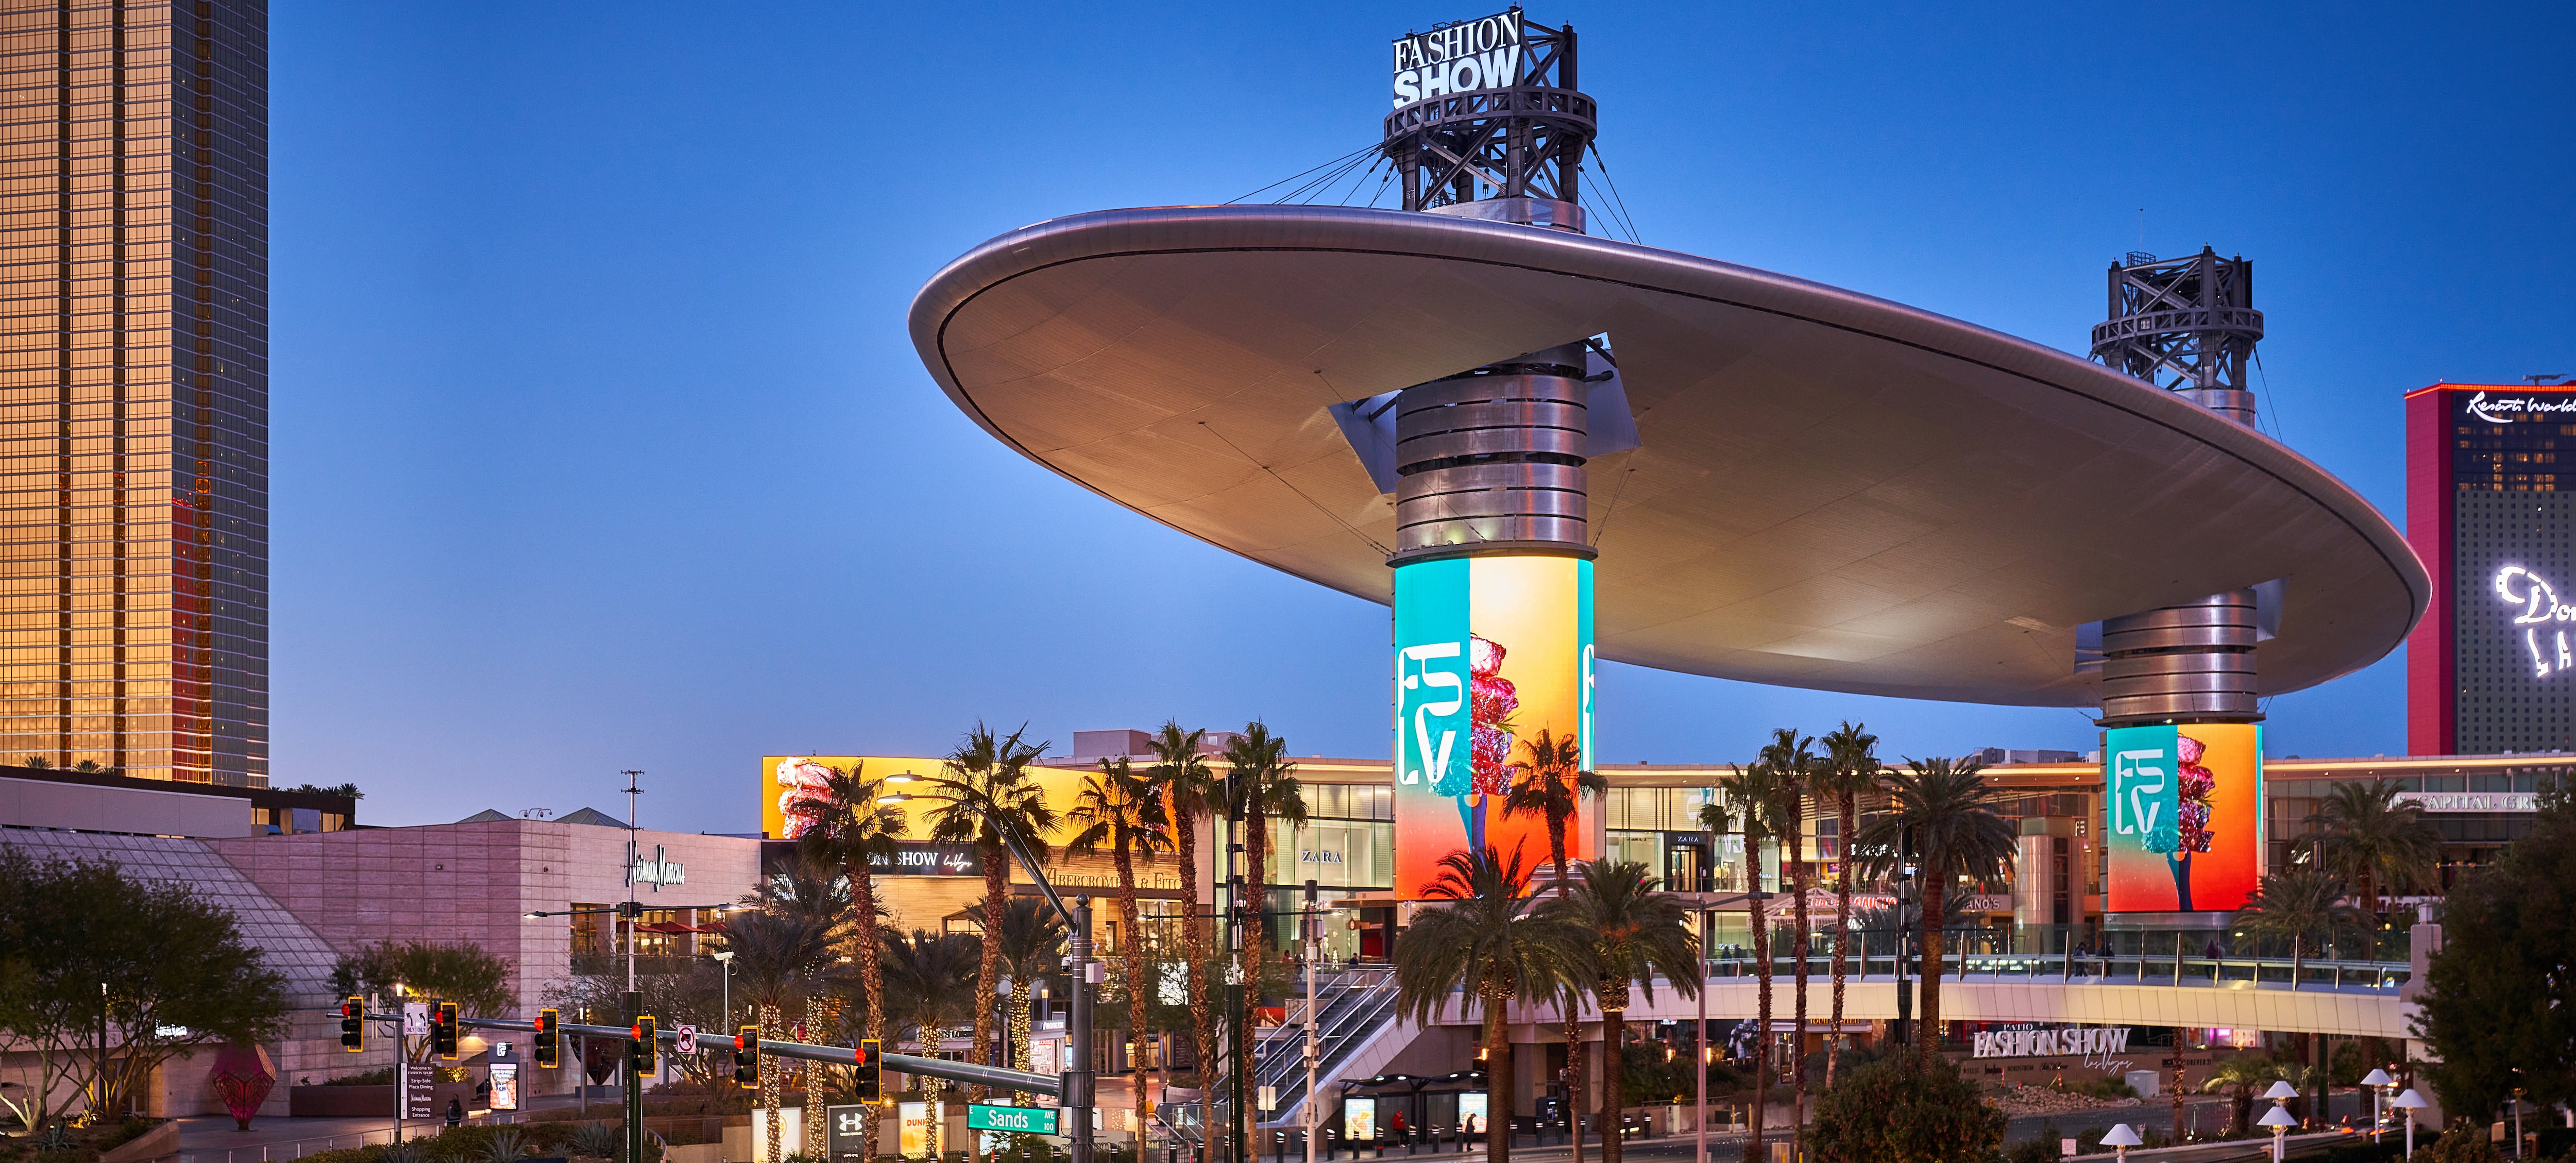 Exterior of Fashion Show Las Vegas property at dusk with large digital displays